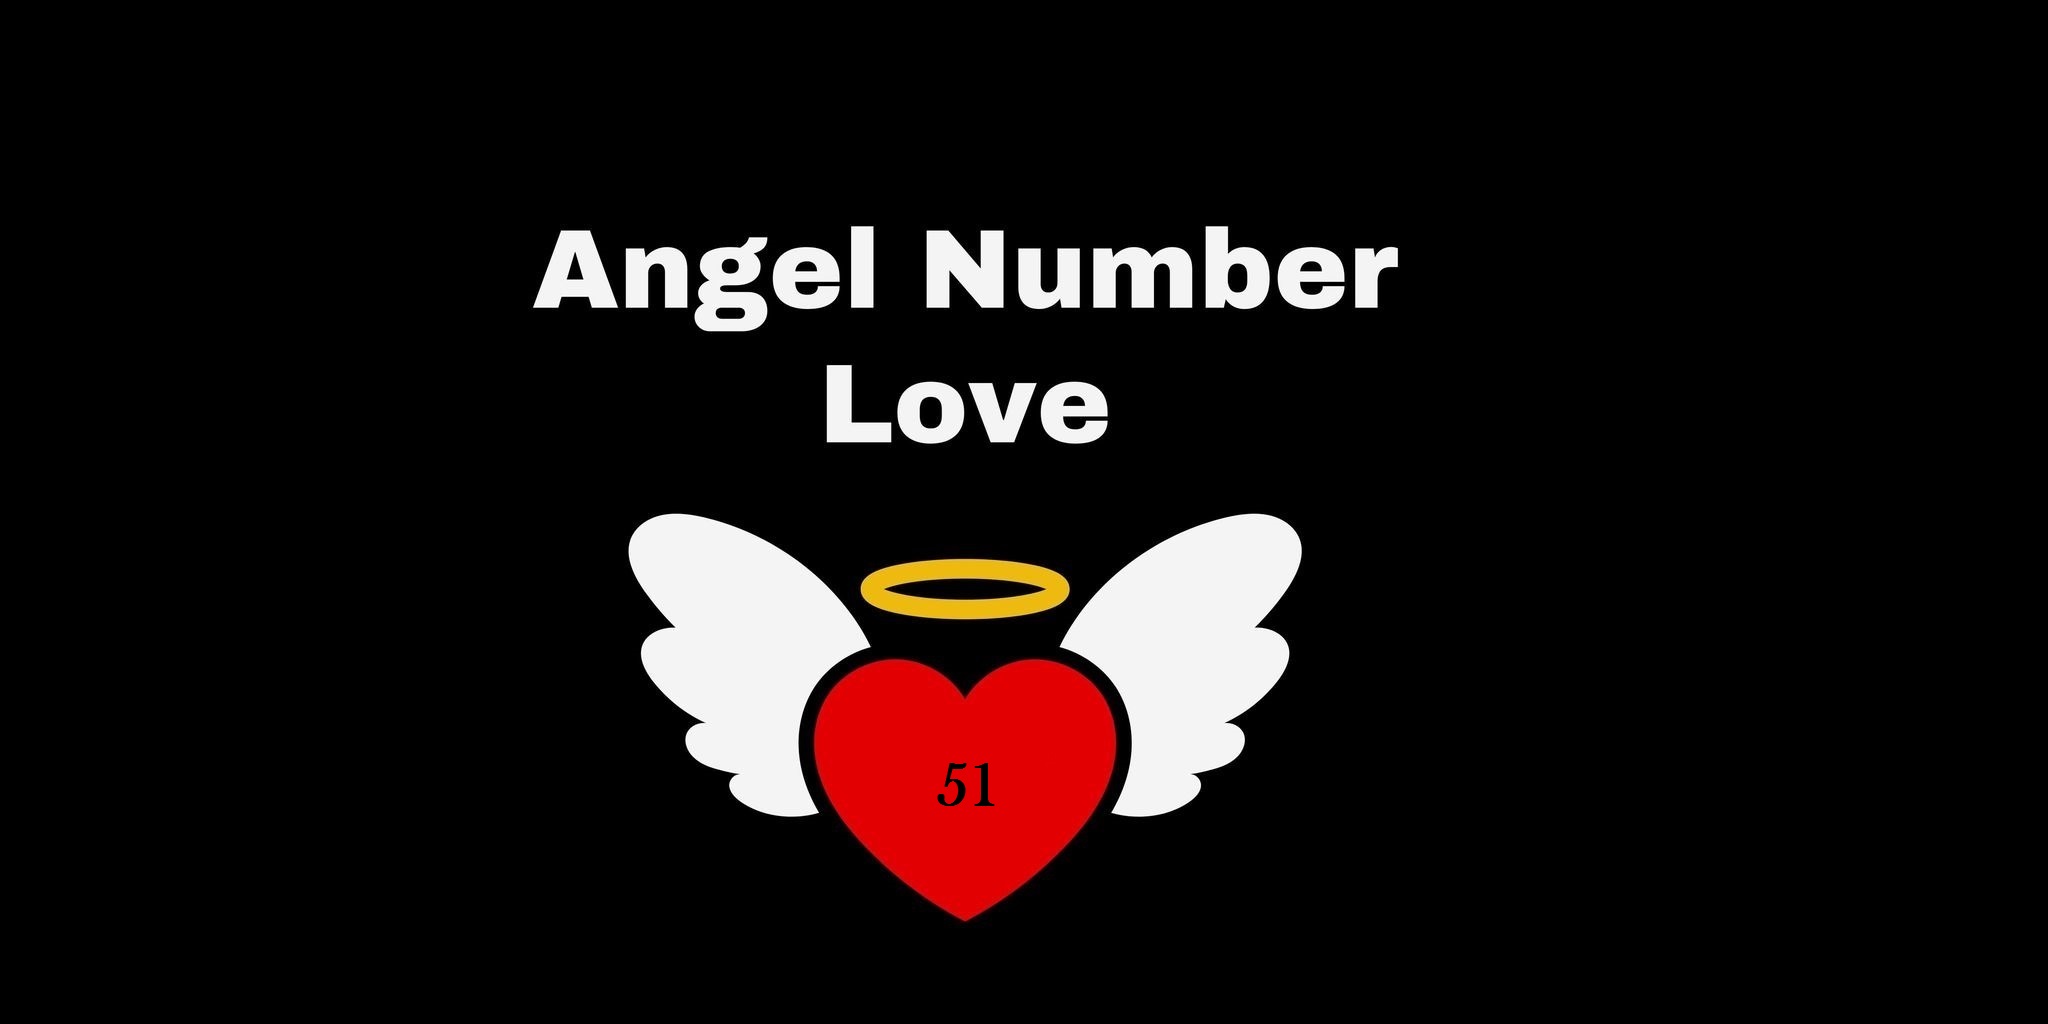 51 Angel Number Meaning In Love